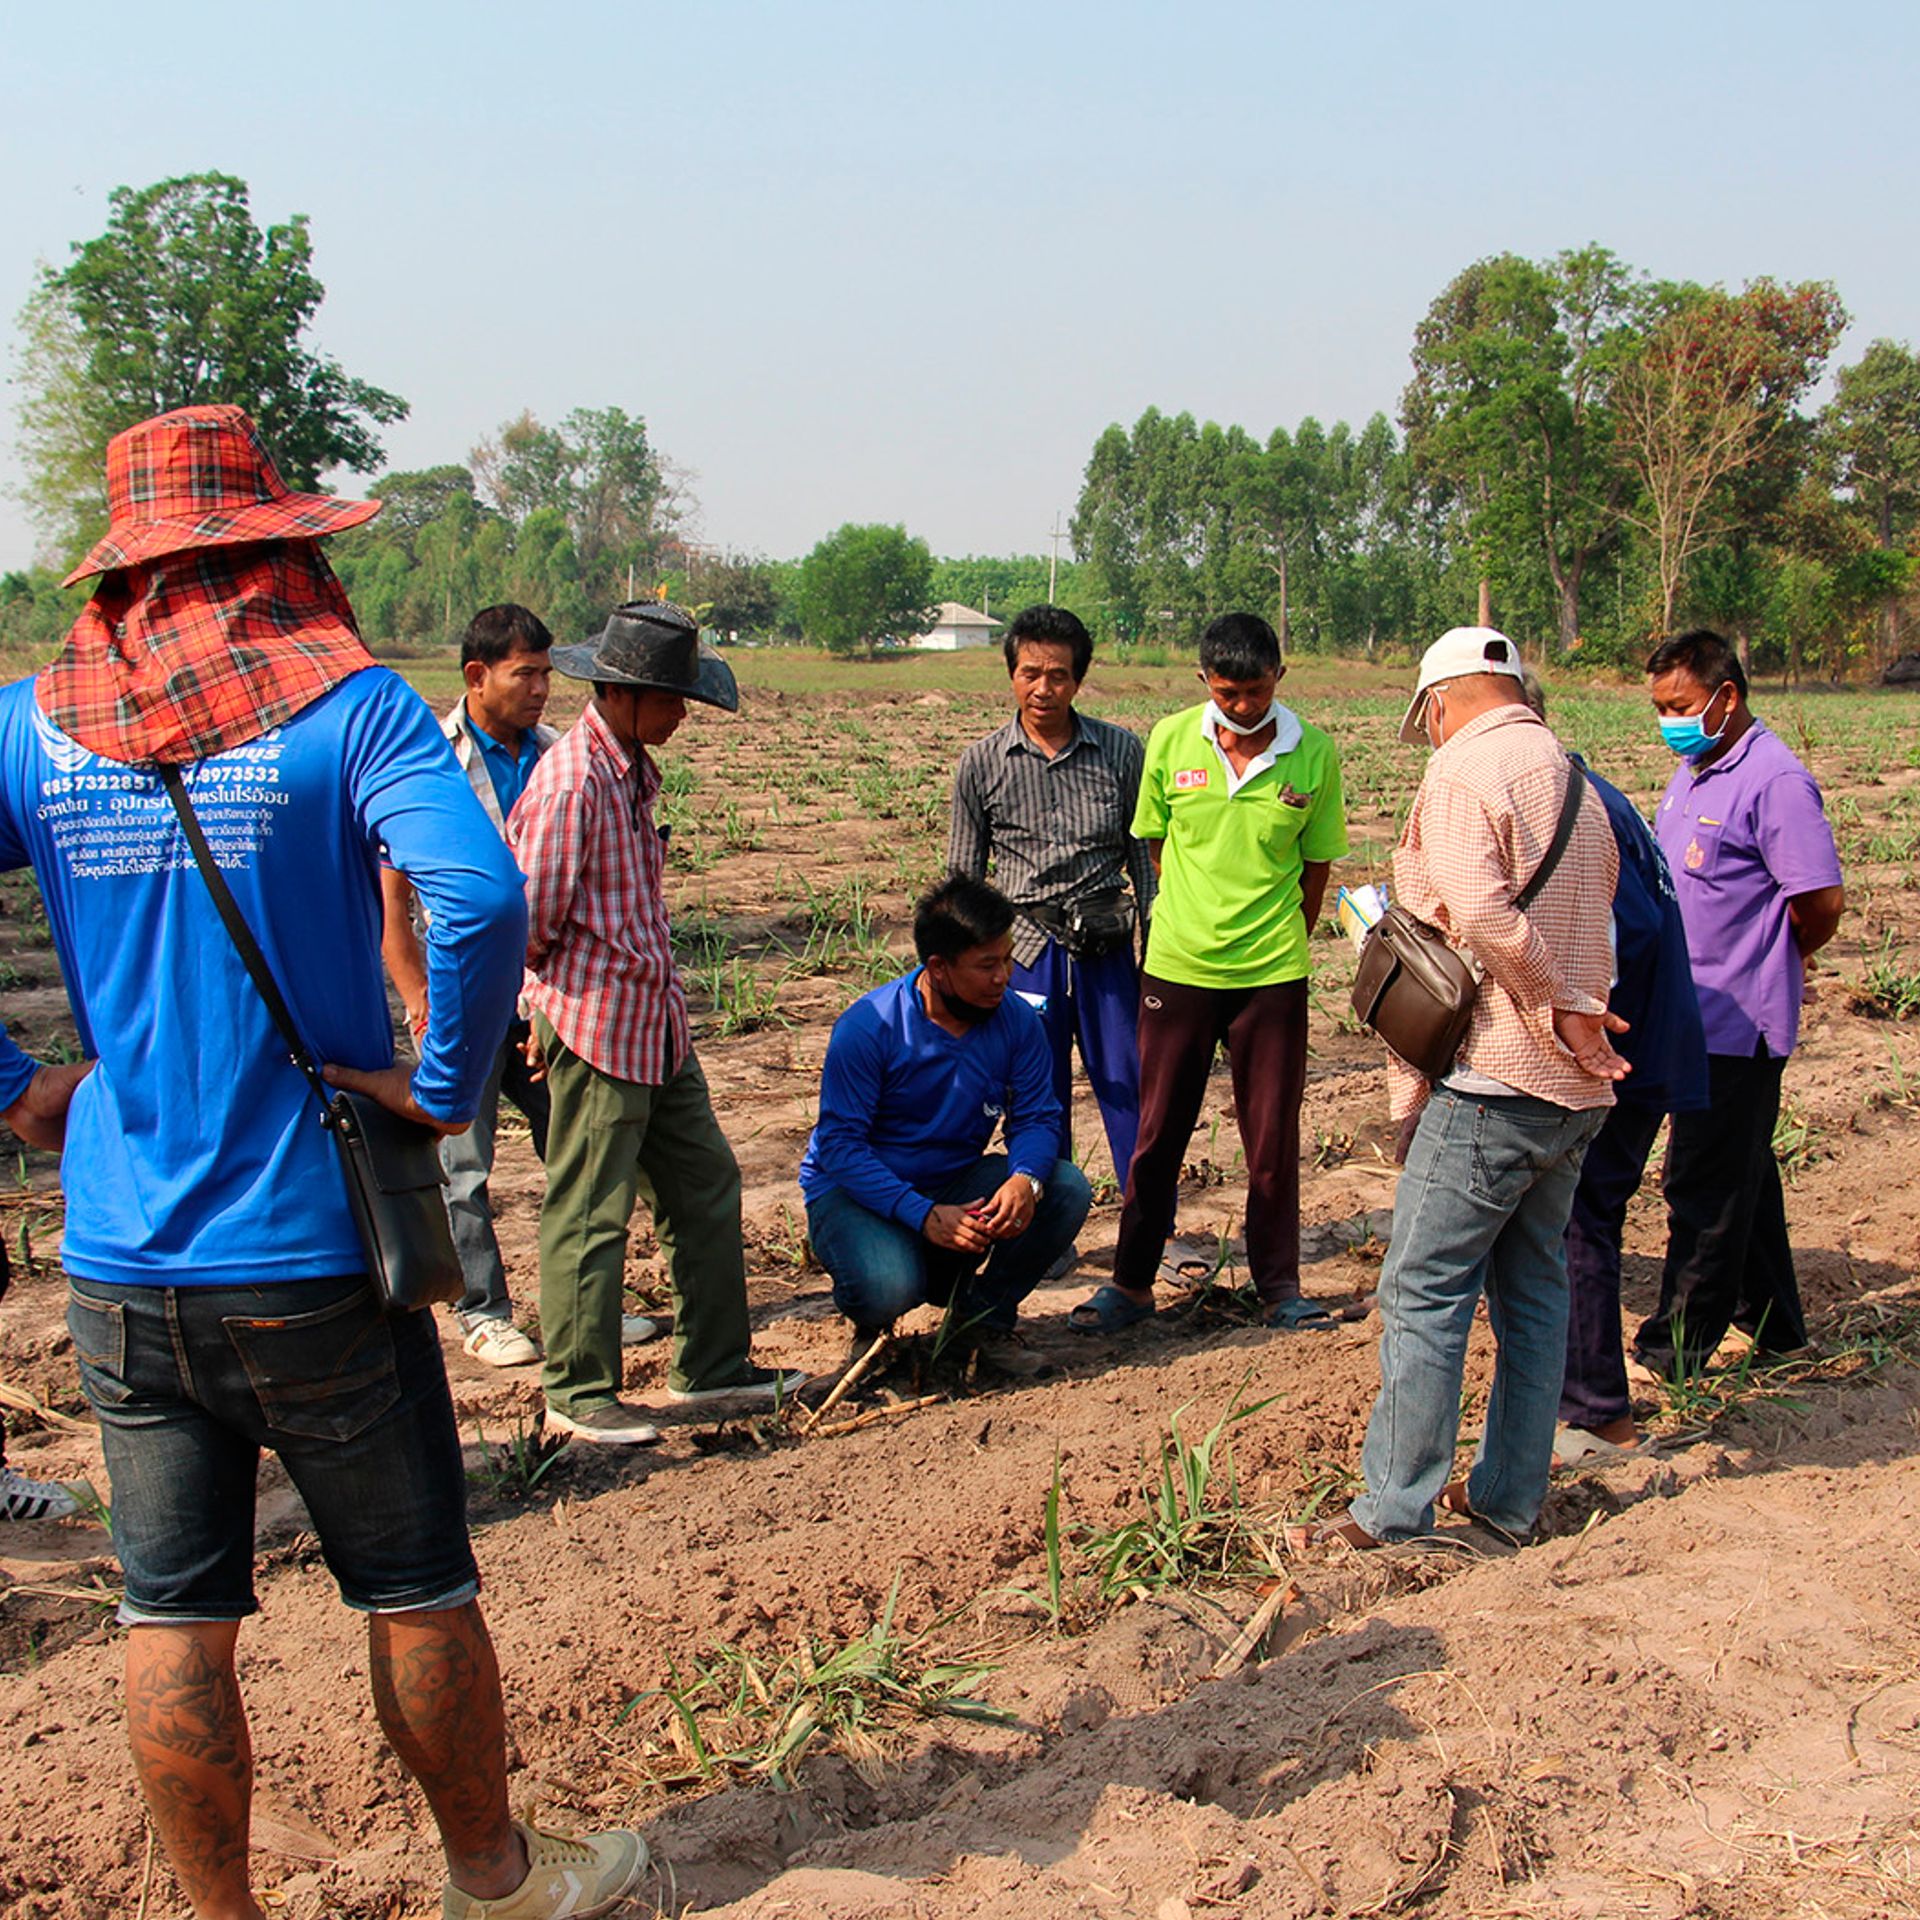 Image of farmers during an on-site training session